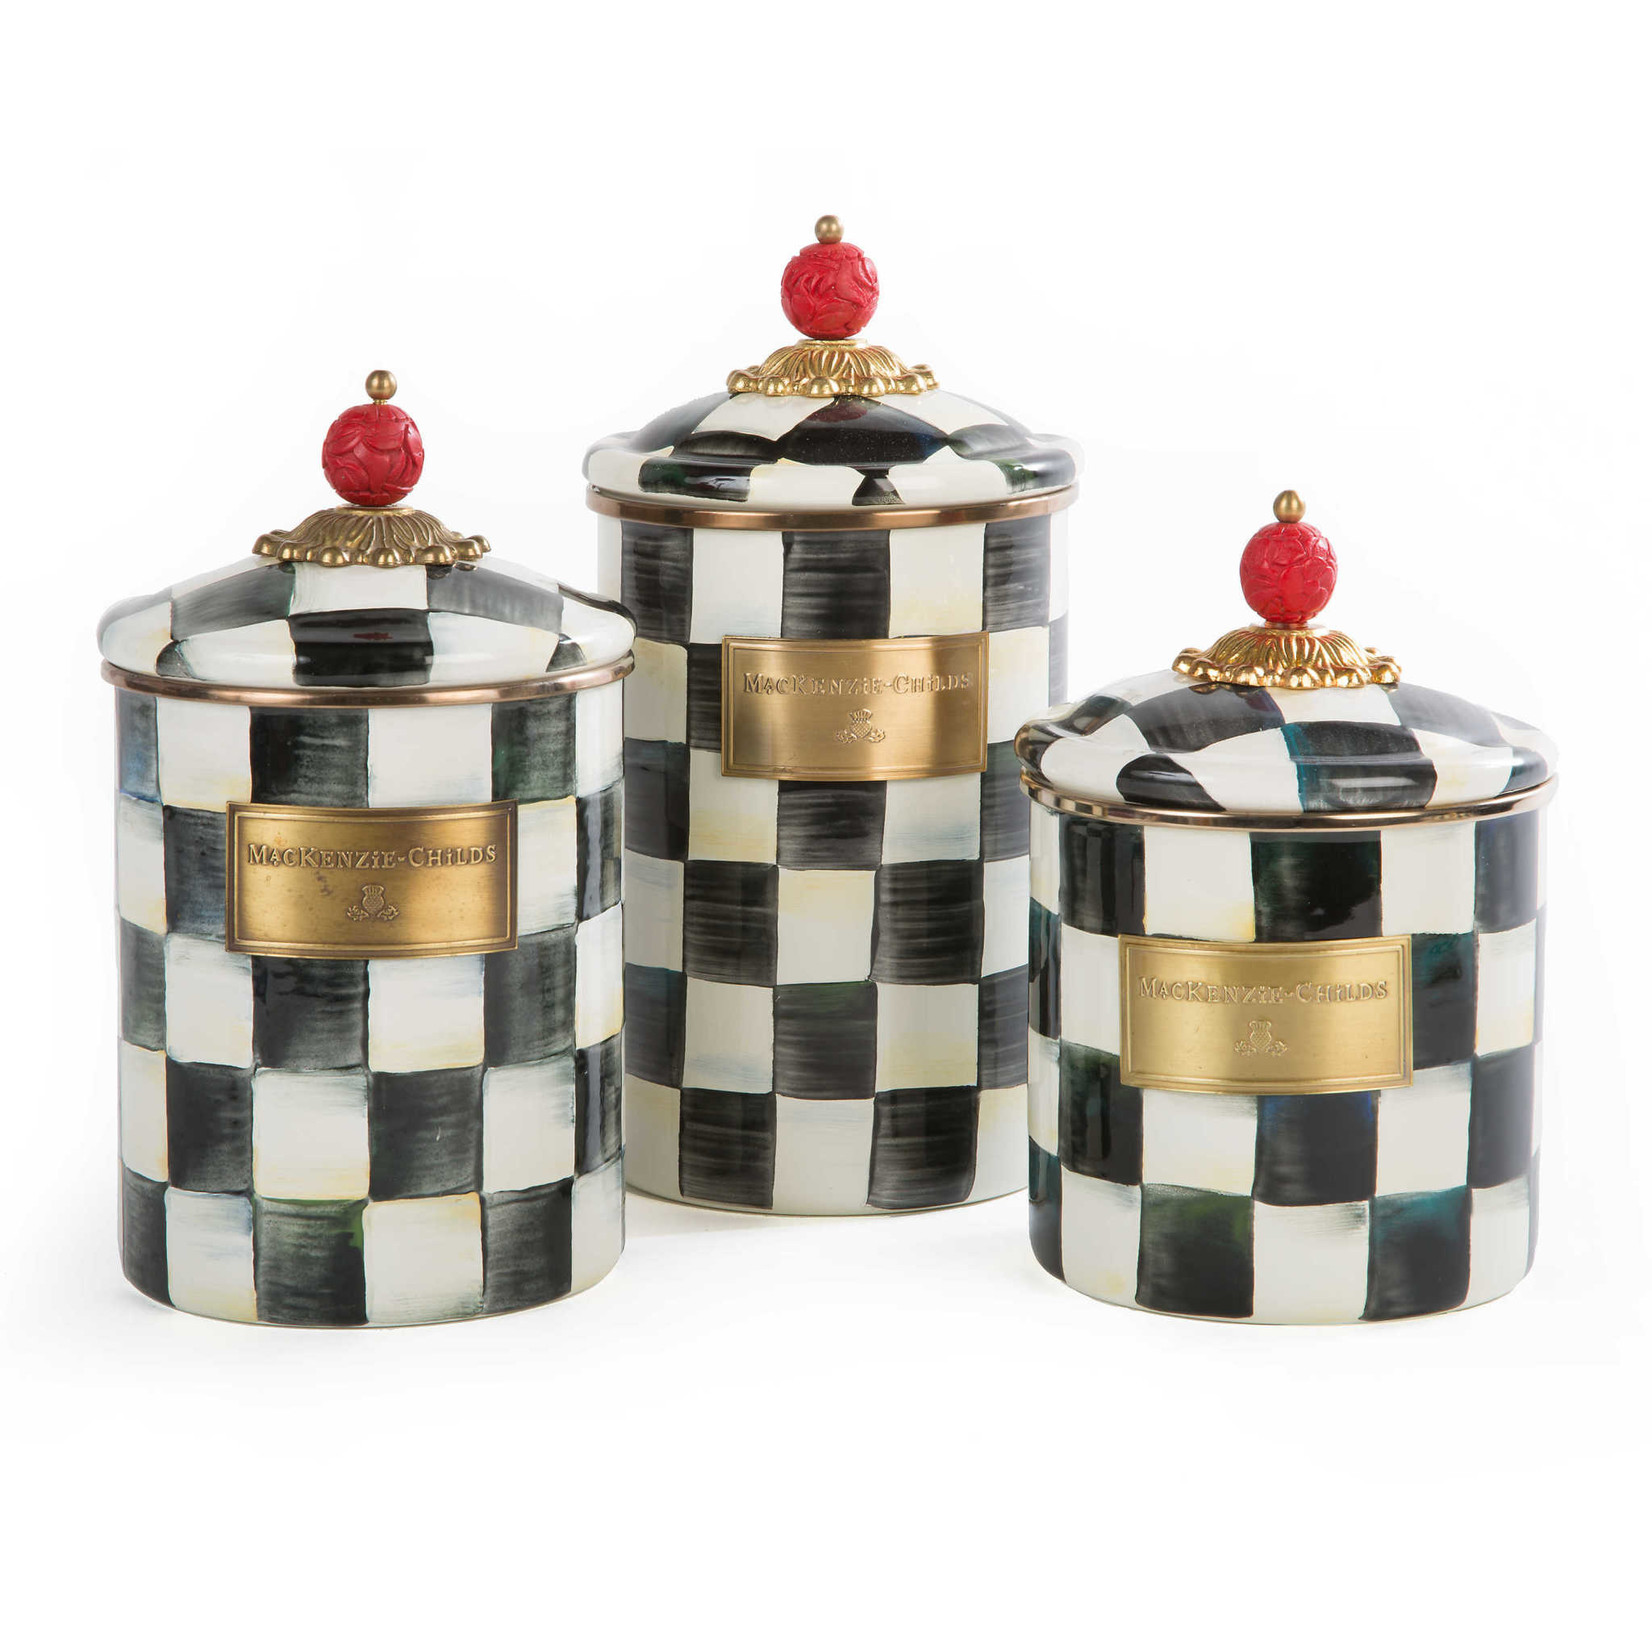 MacKenzie-Childs Courtly Check Enamel Canister - Large